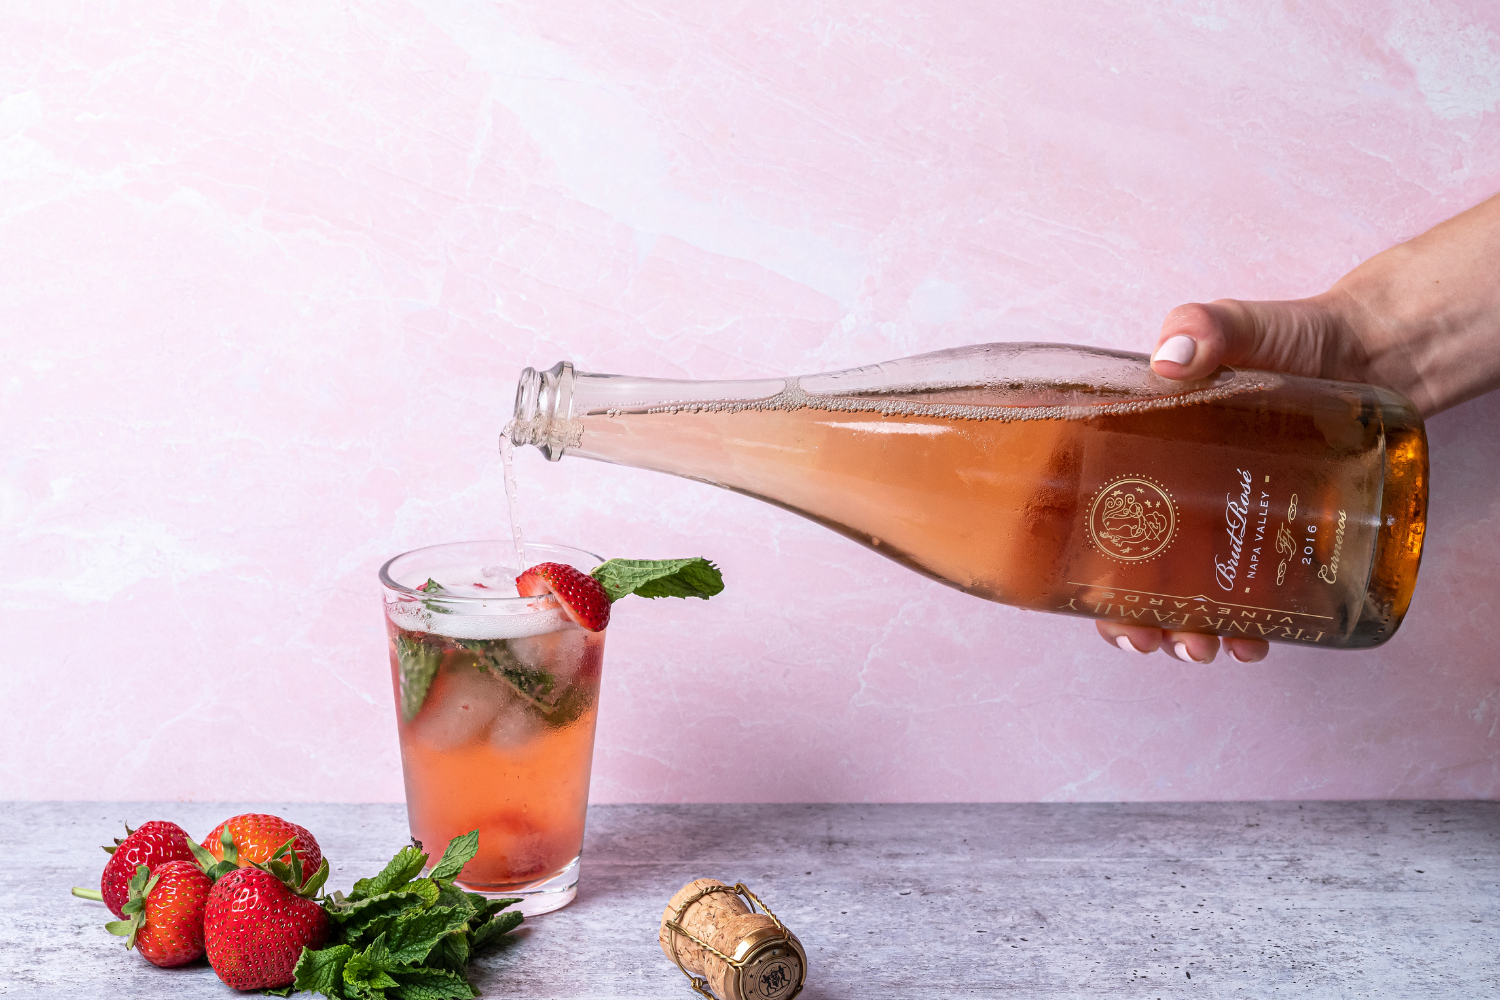 https://www.frankfamilyvineyards.com/blog/wp-content/uploads/2021/08/Sparkling-Strawberry-Mojito-Pour.png